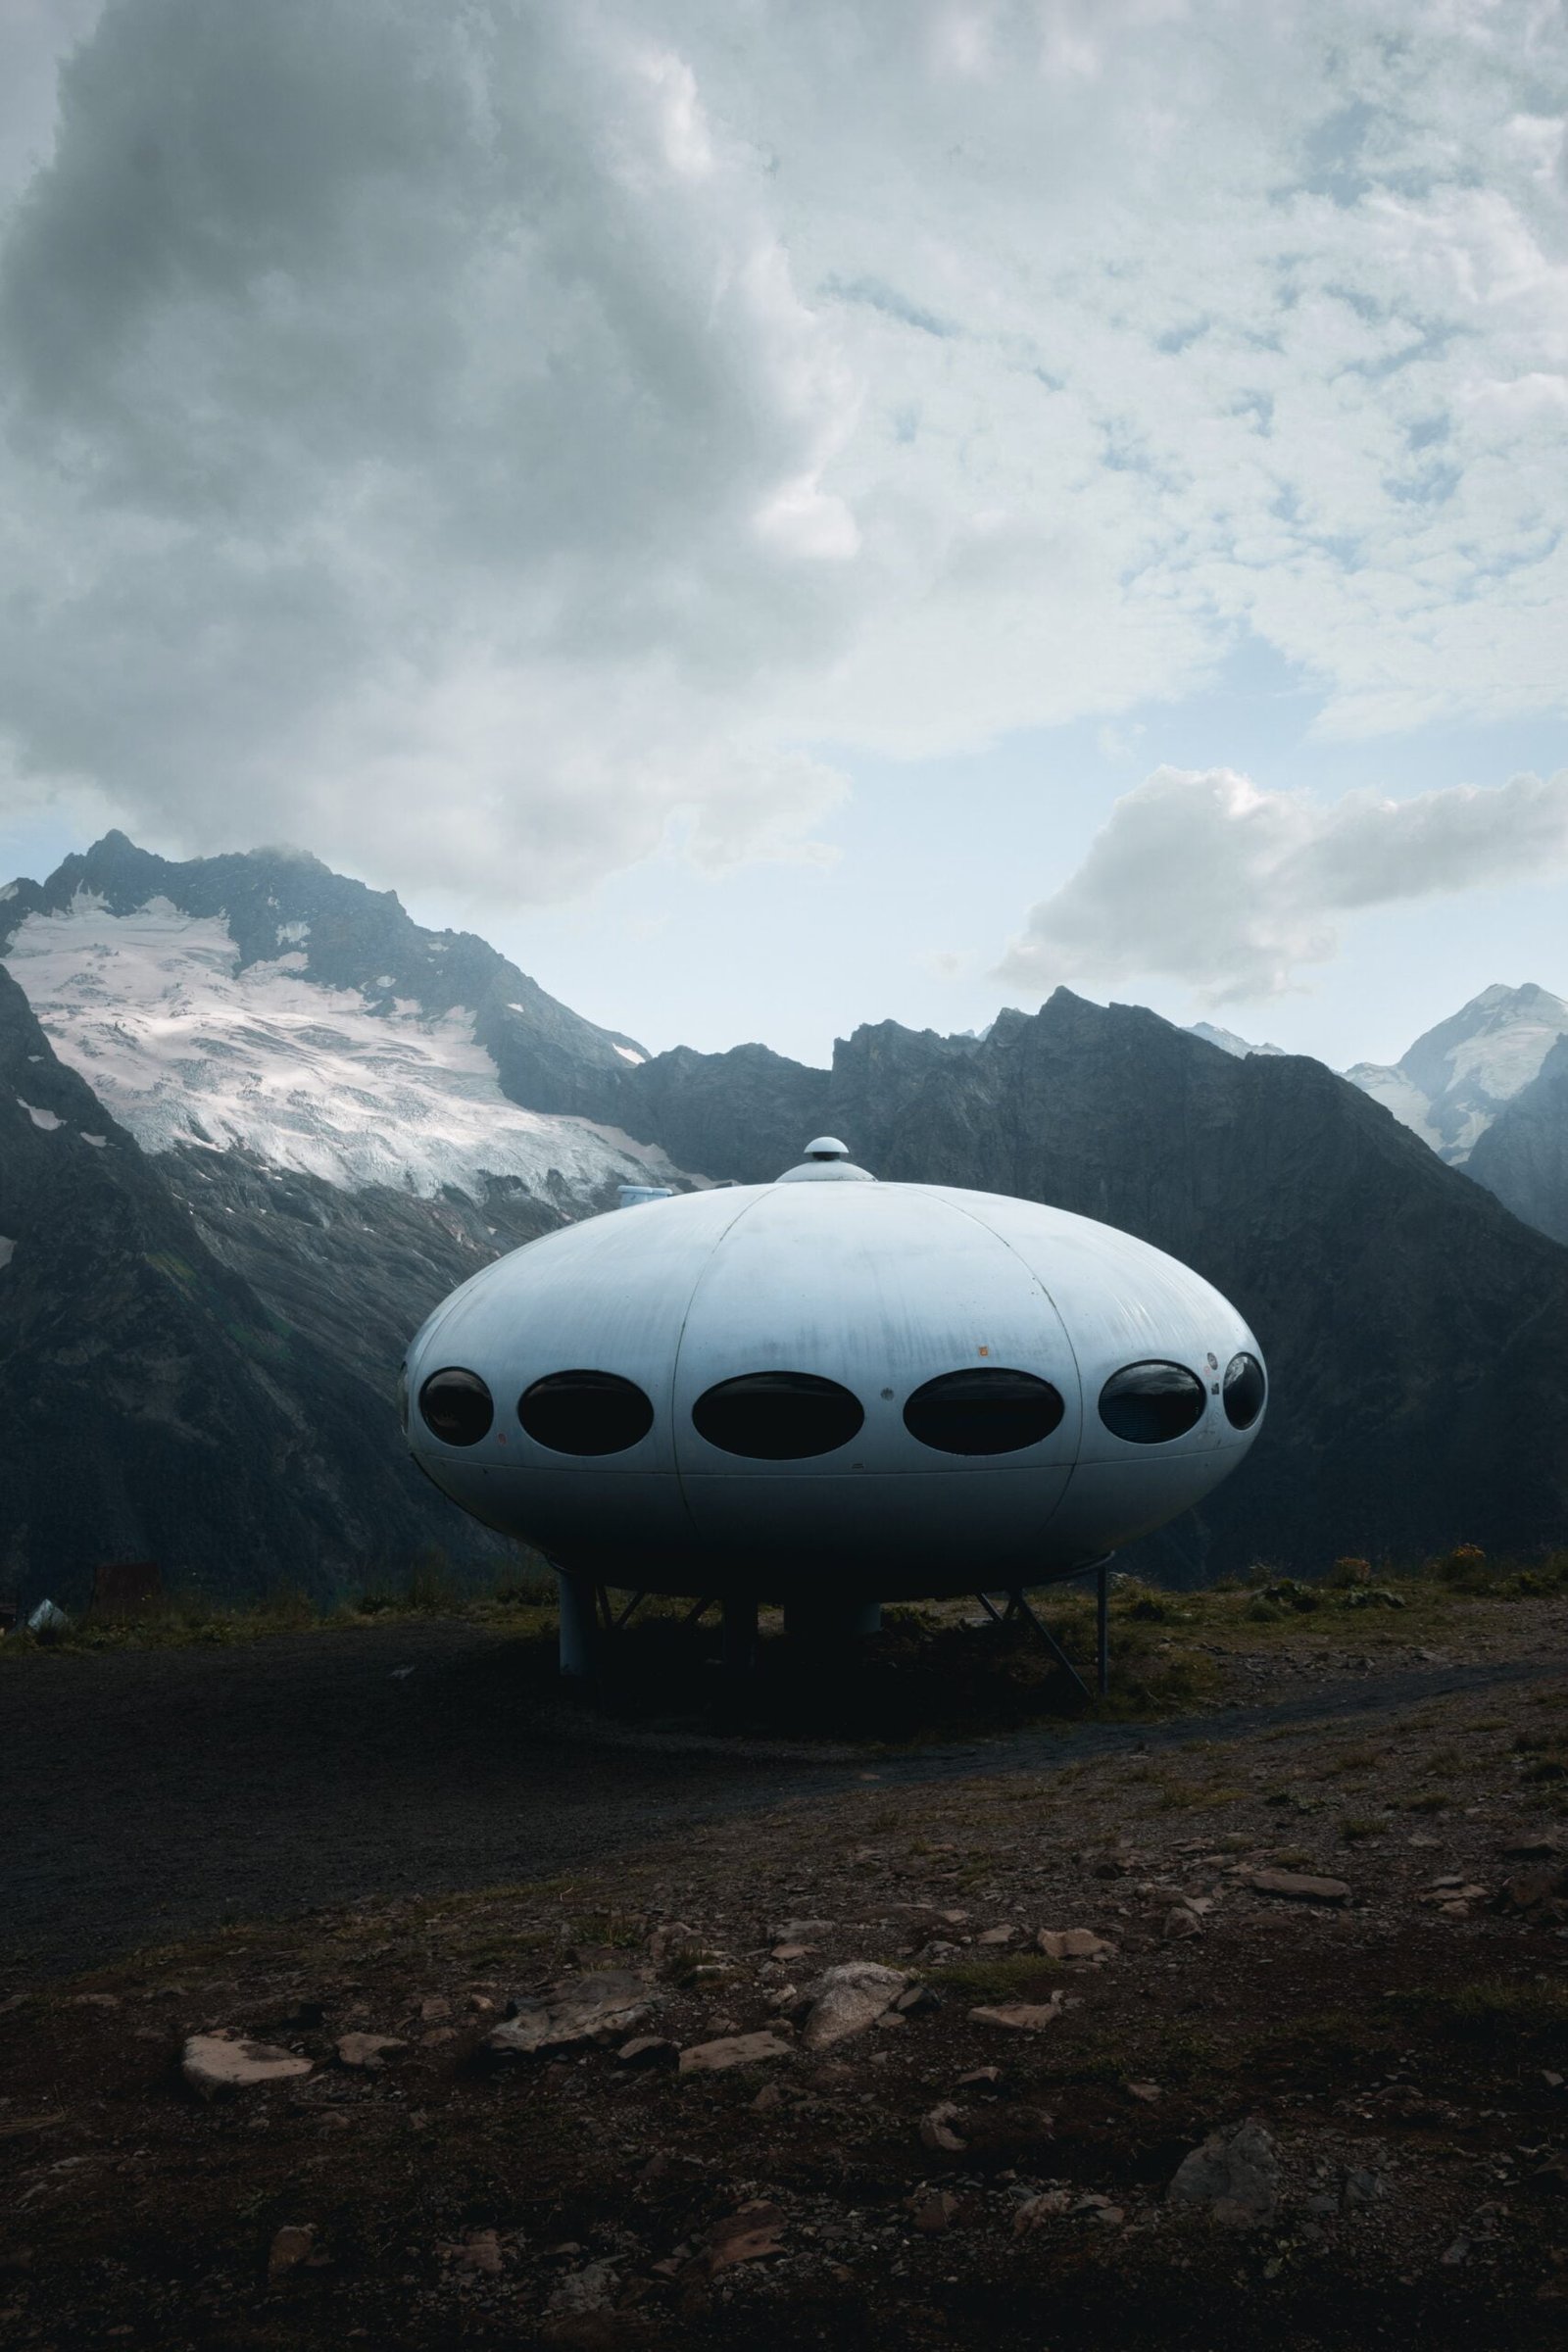 A ufo has landed